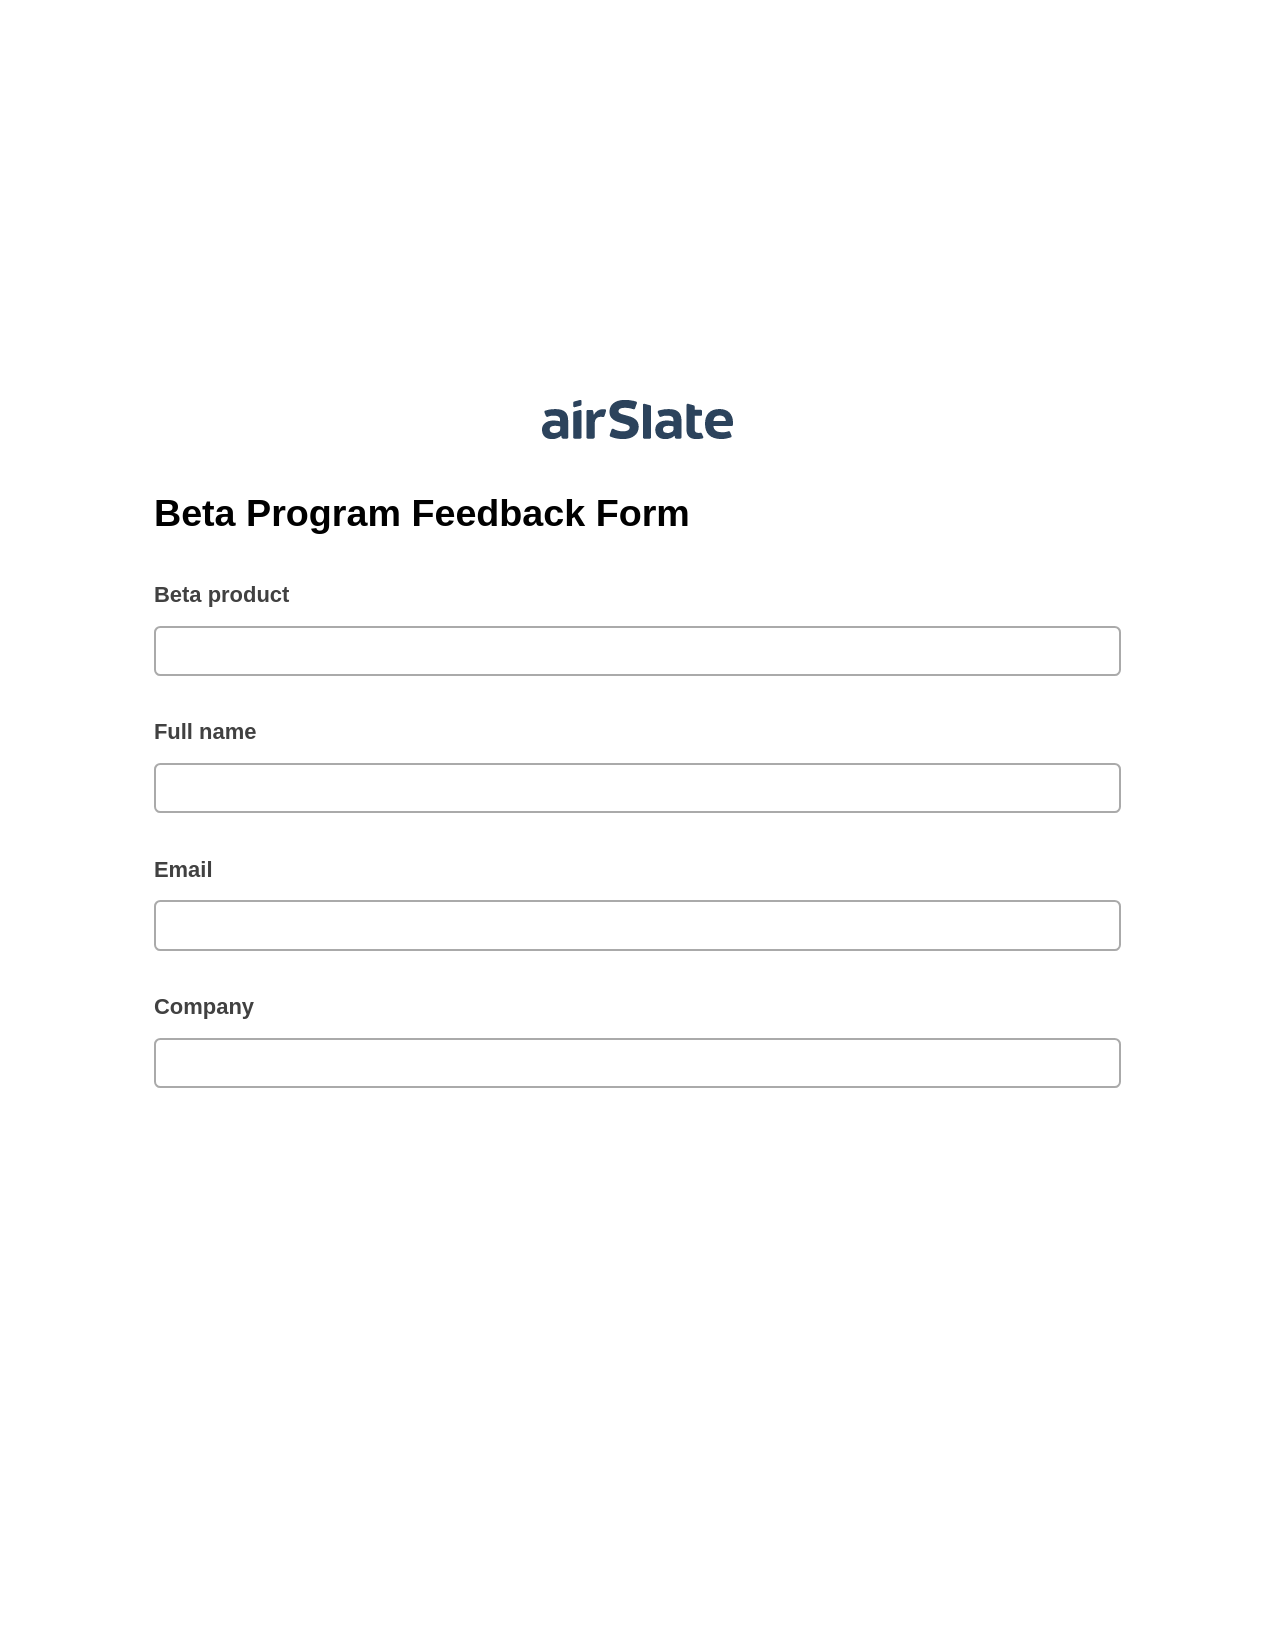 Beta Program Feedback Form Pre-fill Dropdown from Airtable, Lock the slate bot, Export to NetSuite Record Bot